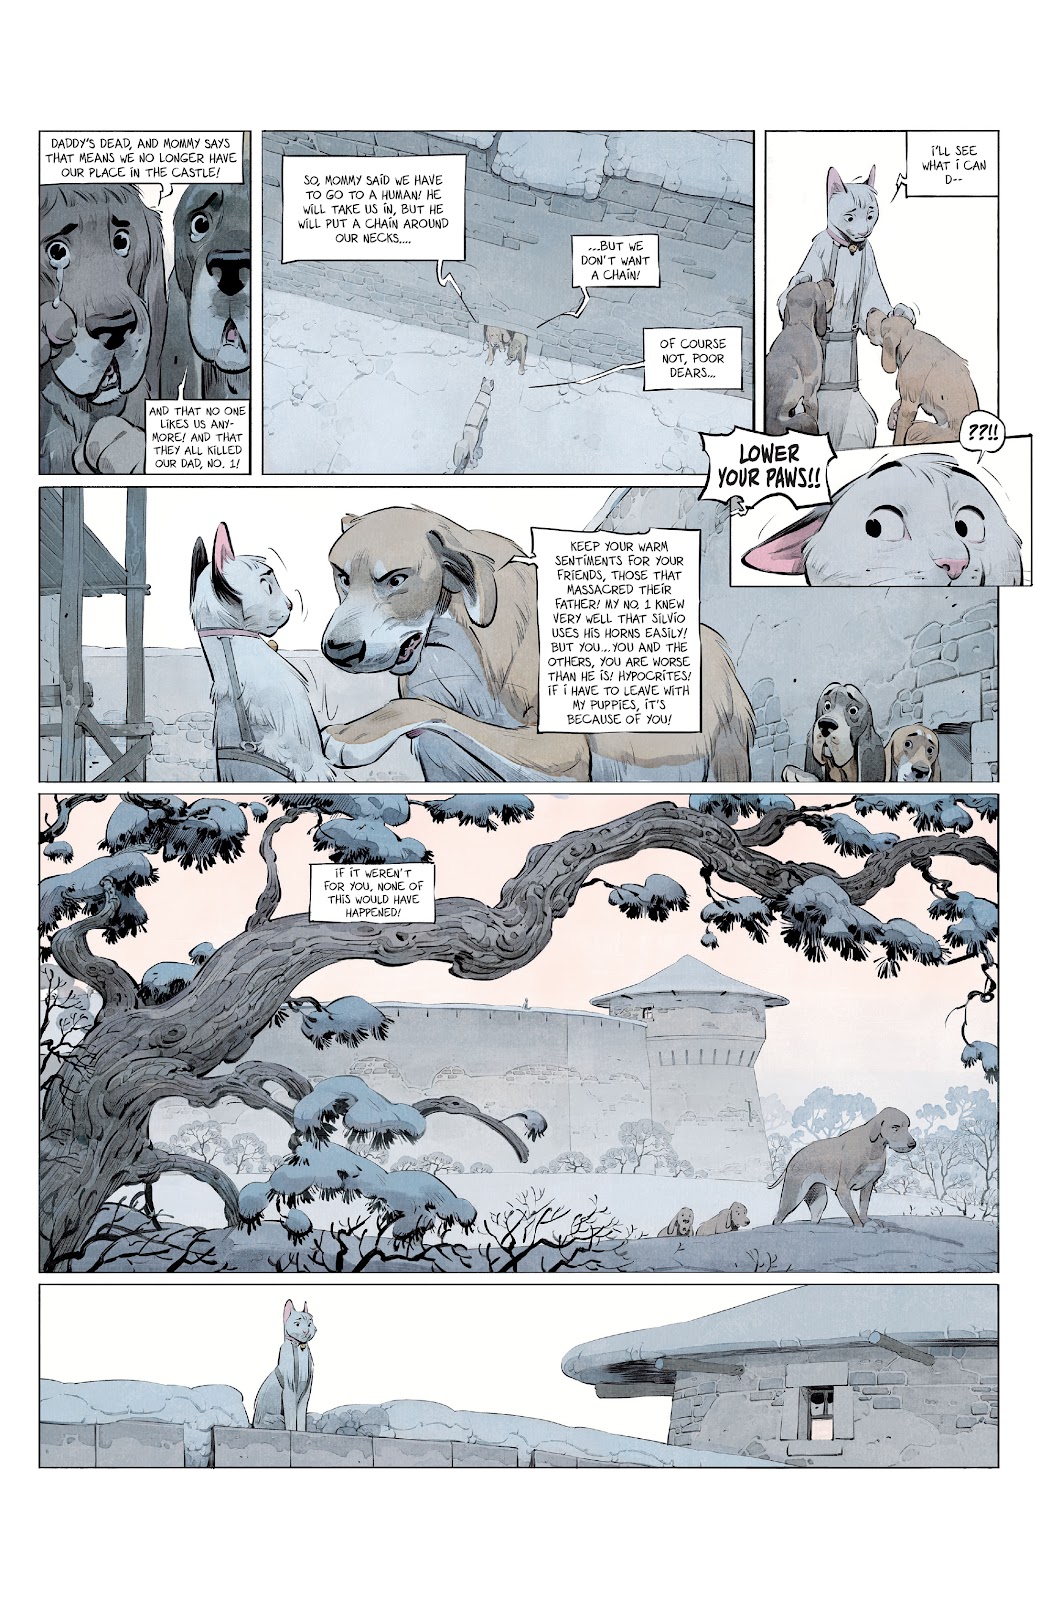 Animal Castle Vol. 2 issue 1 - Page 10